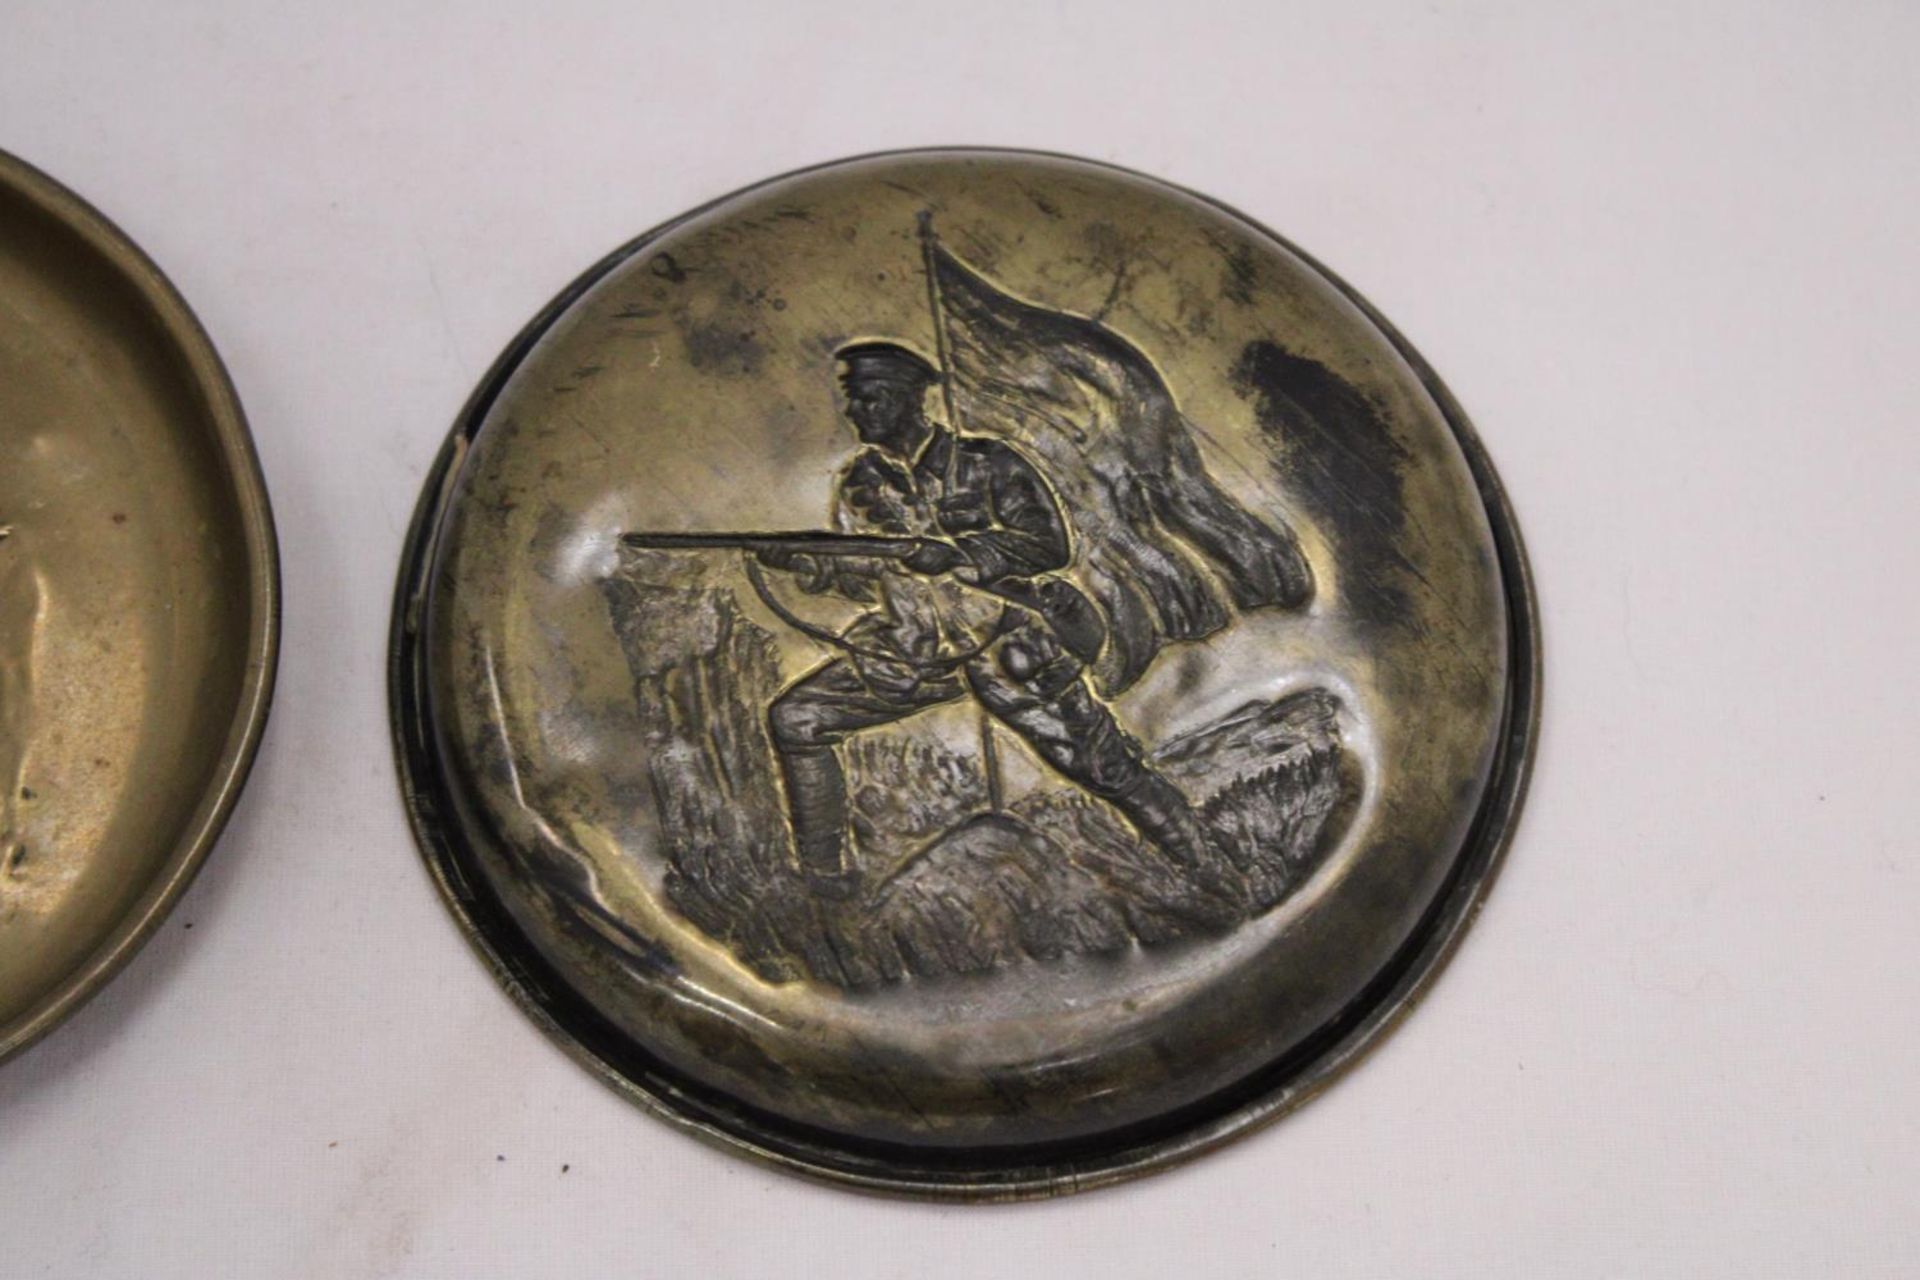 TWO VINTAGE BRASS TRAYS DEPICTING RUSSIAN BOLSHEVIK SOLDIERS, DIAMETER 12.5CM - Image 5 of 5